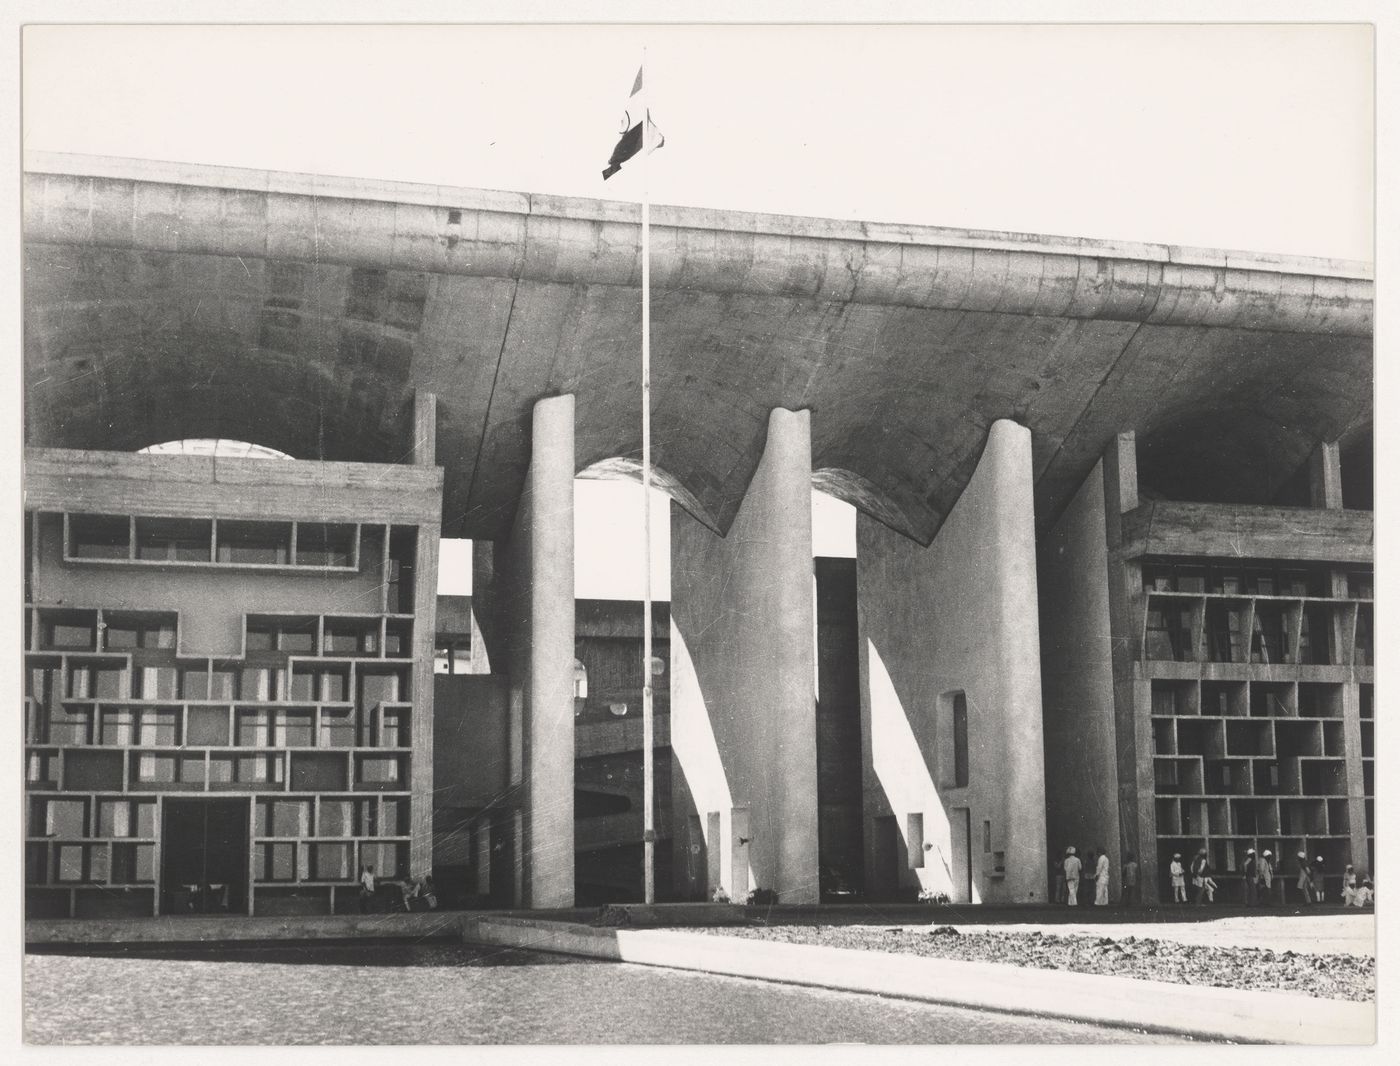 Partial view of the High Court's portico, Capitol Complex, Sector 1, Chandigarh, India